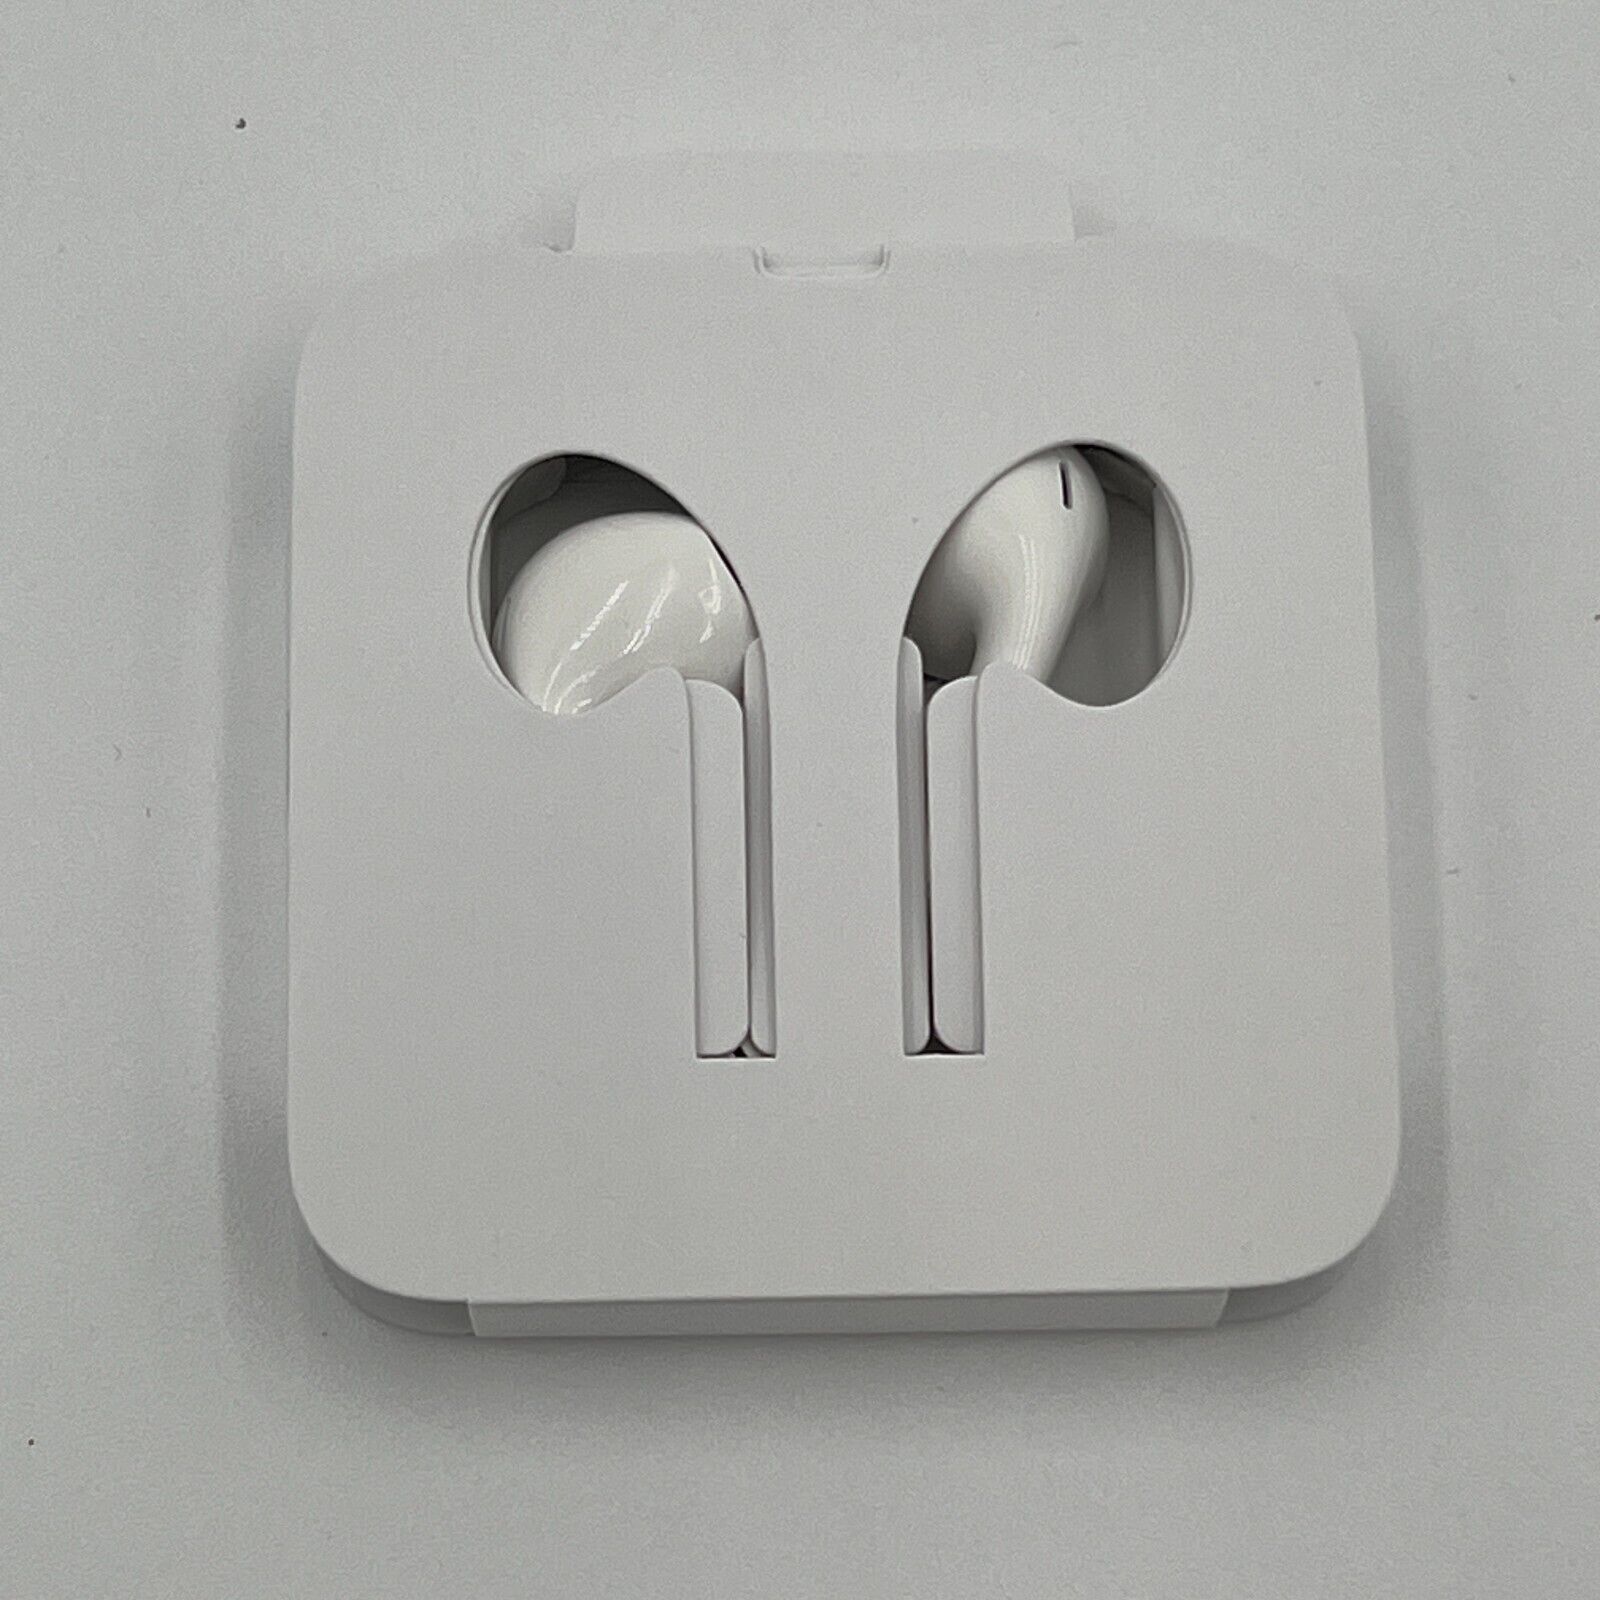 Apple Earpods - iPhone 14 13 12 Lightning Cable OEM Earbud Headphones Wired - $7.66